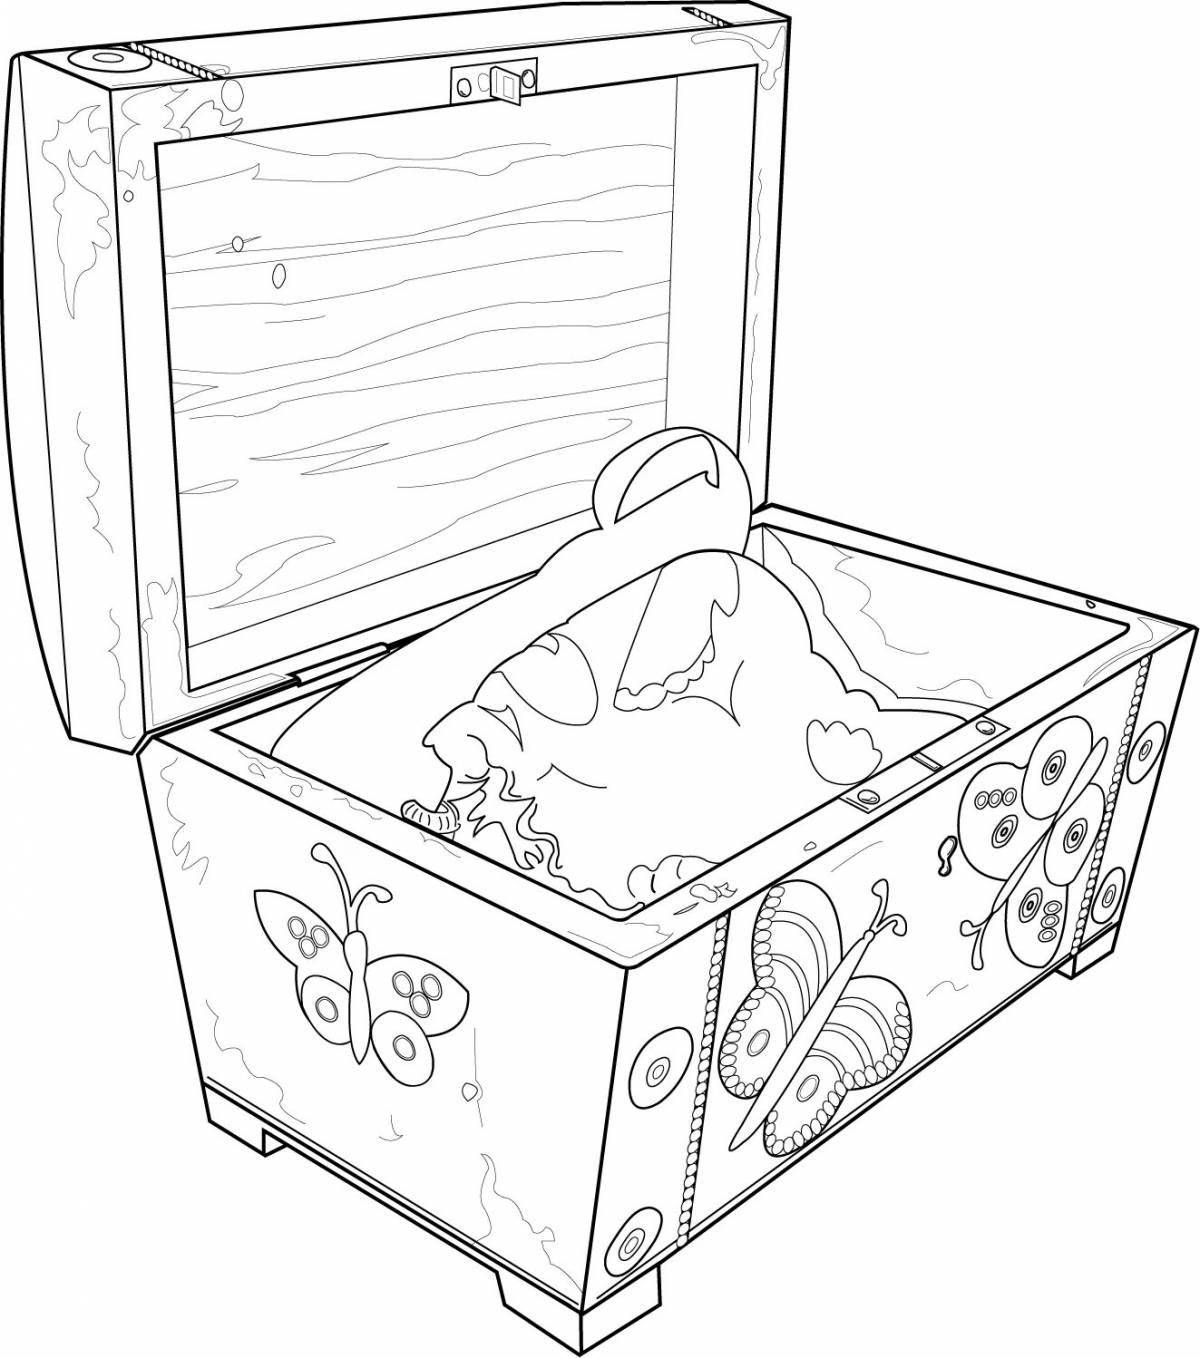 Glittering Jewelry Box coloring book for kids